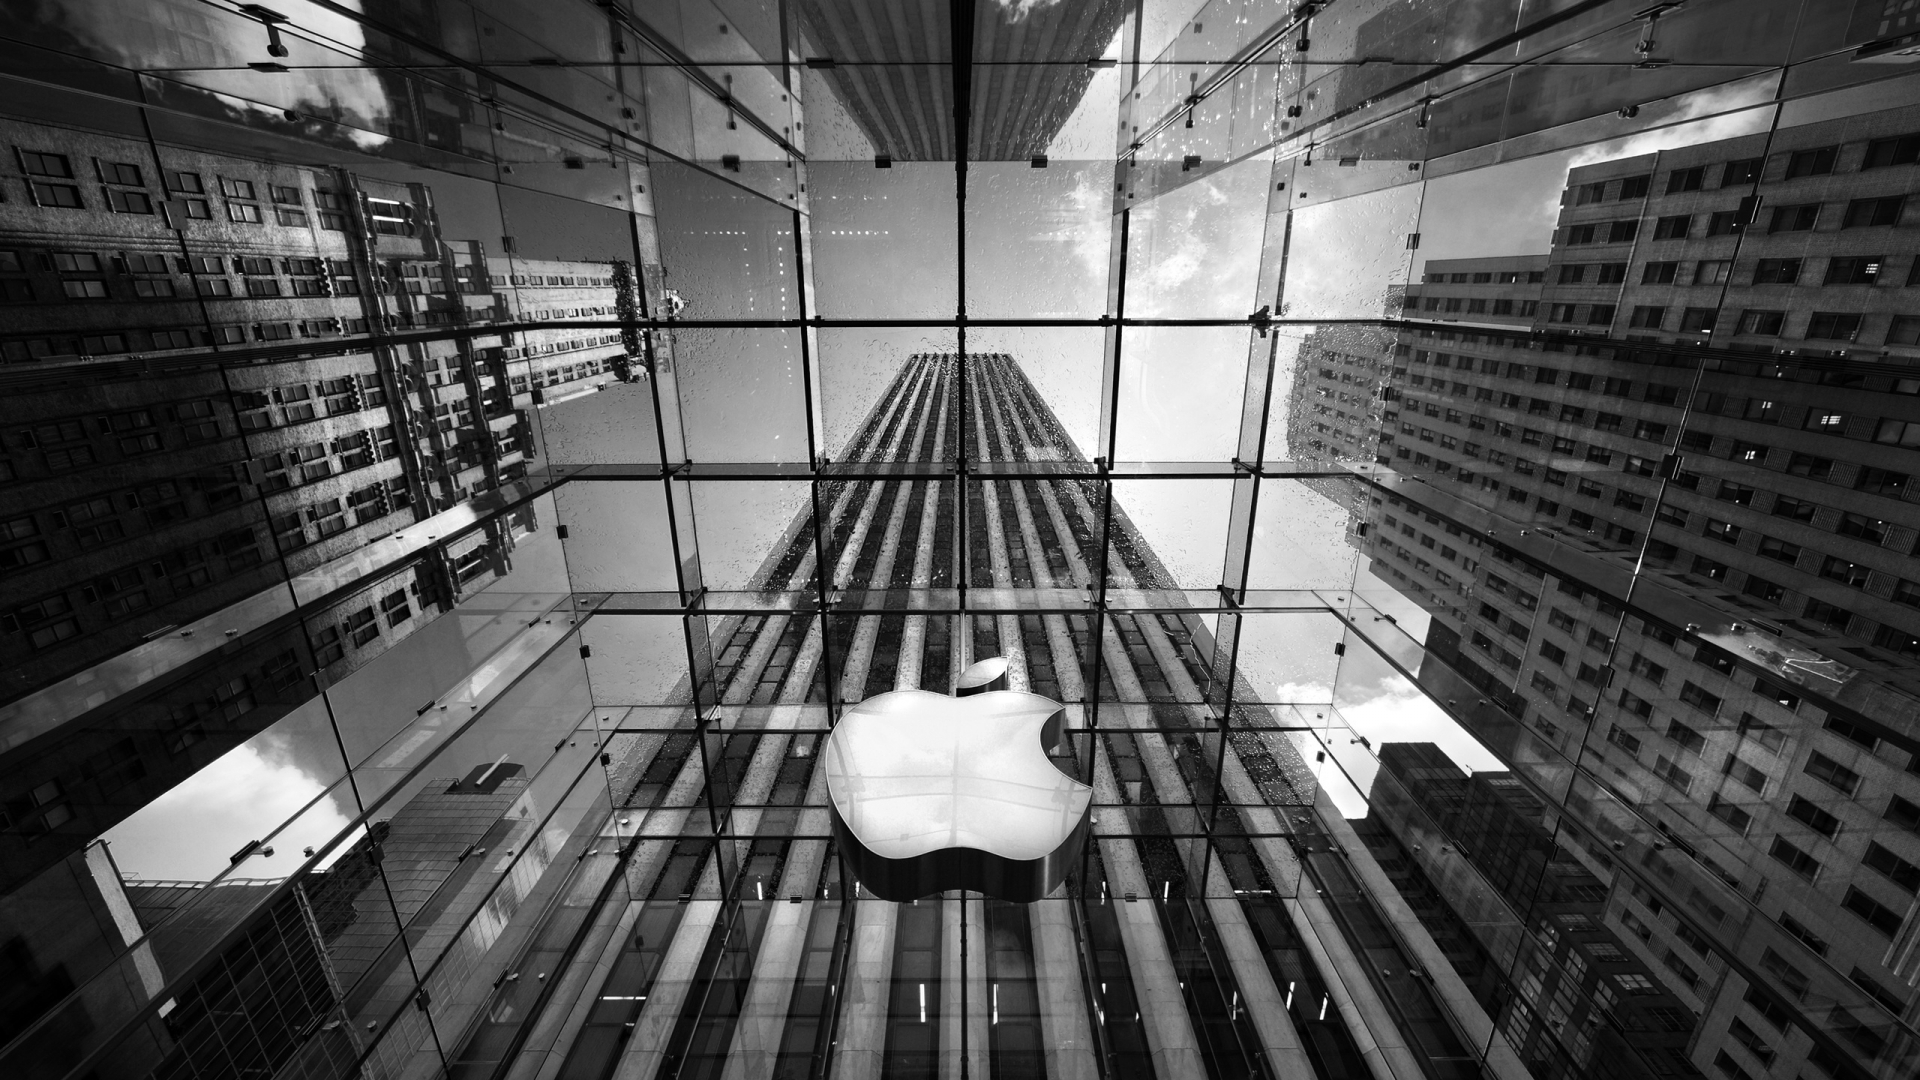 Apple in big Apple for 1920 x 1080 HDTV 1080p resolution